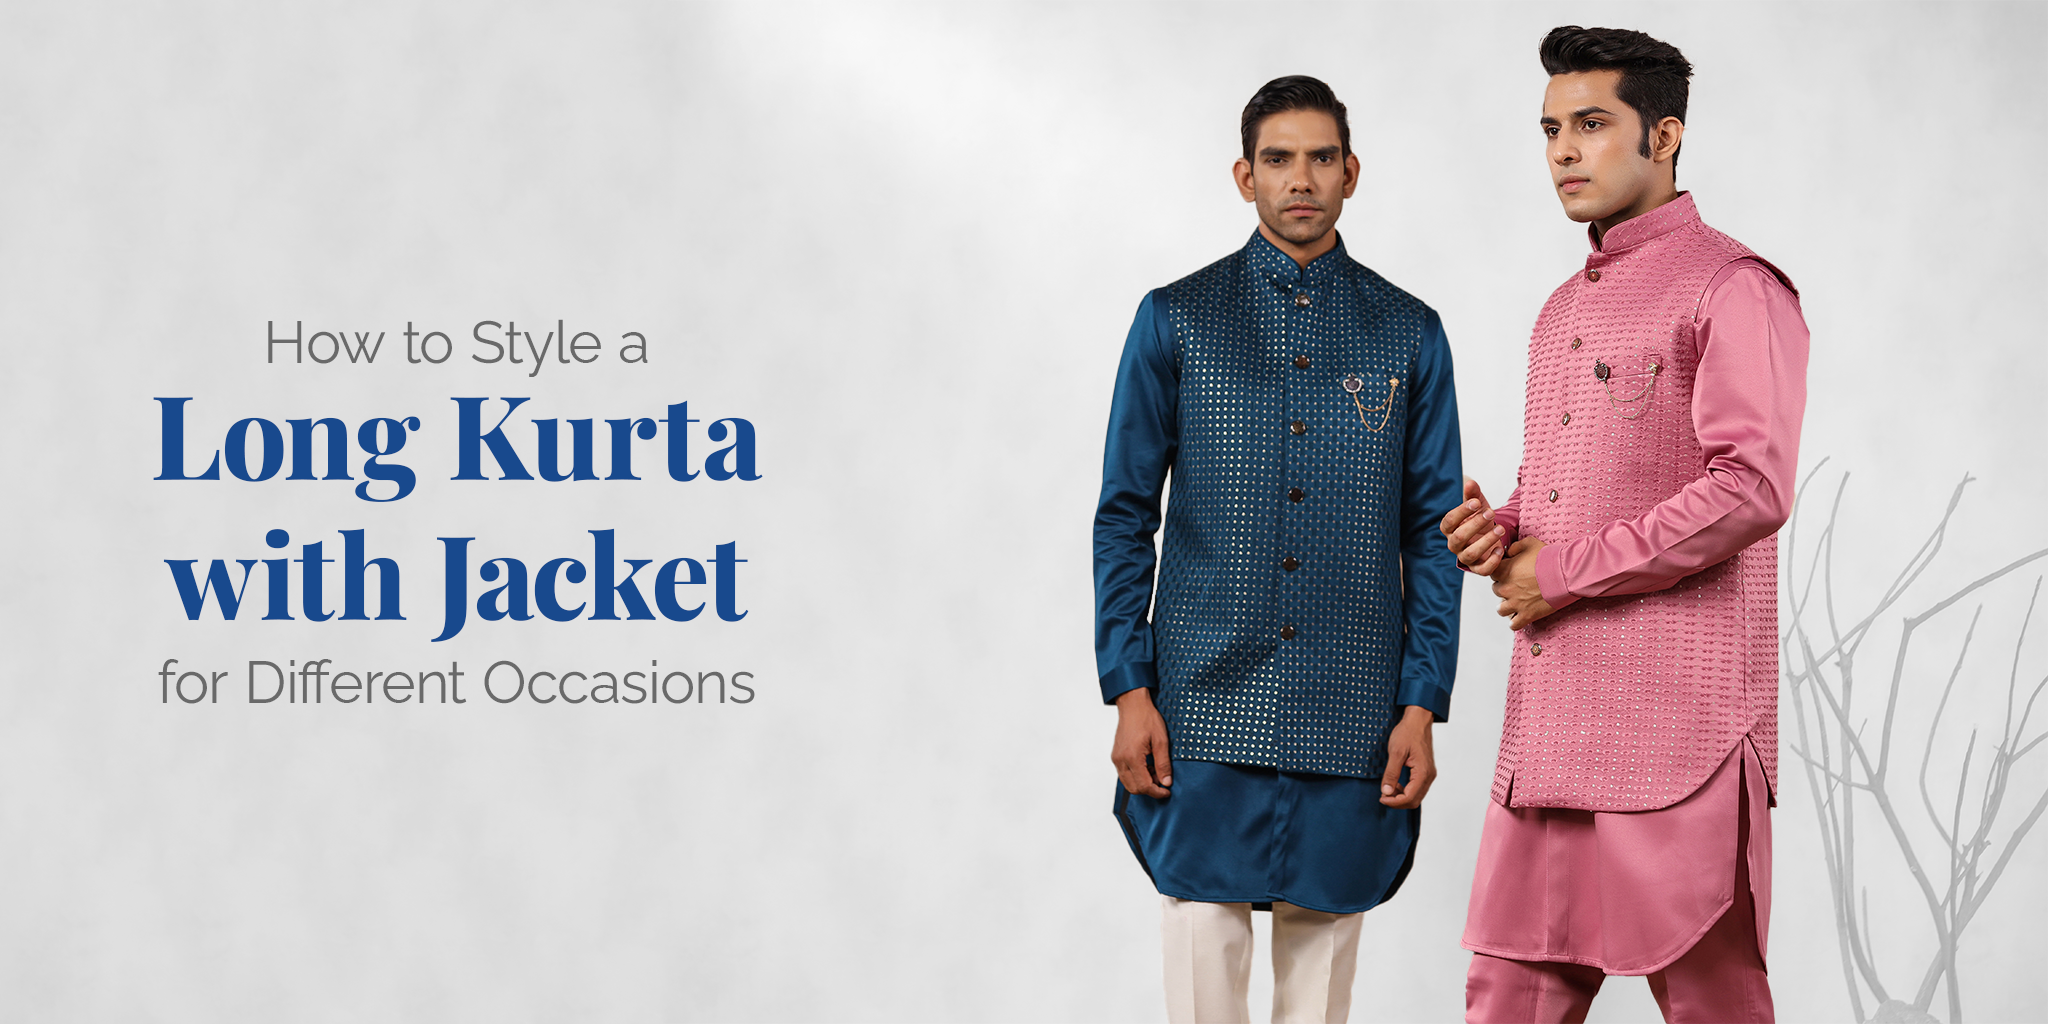 How to Style a Long Kurta with Jacket for Different Occasions